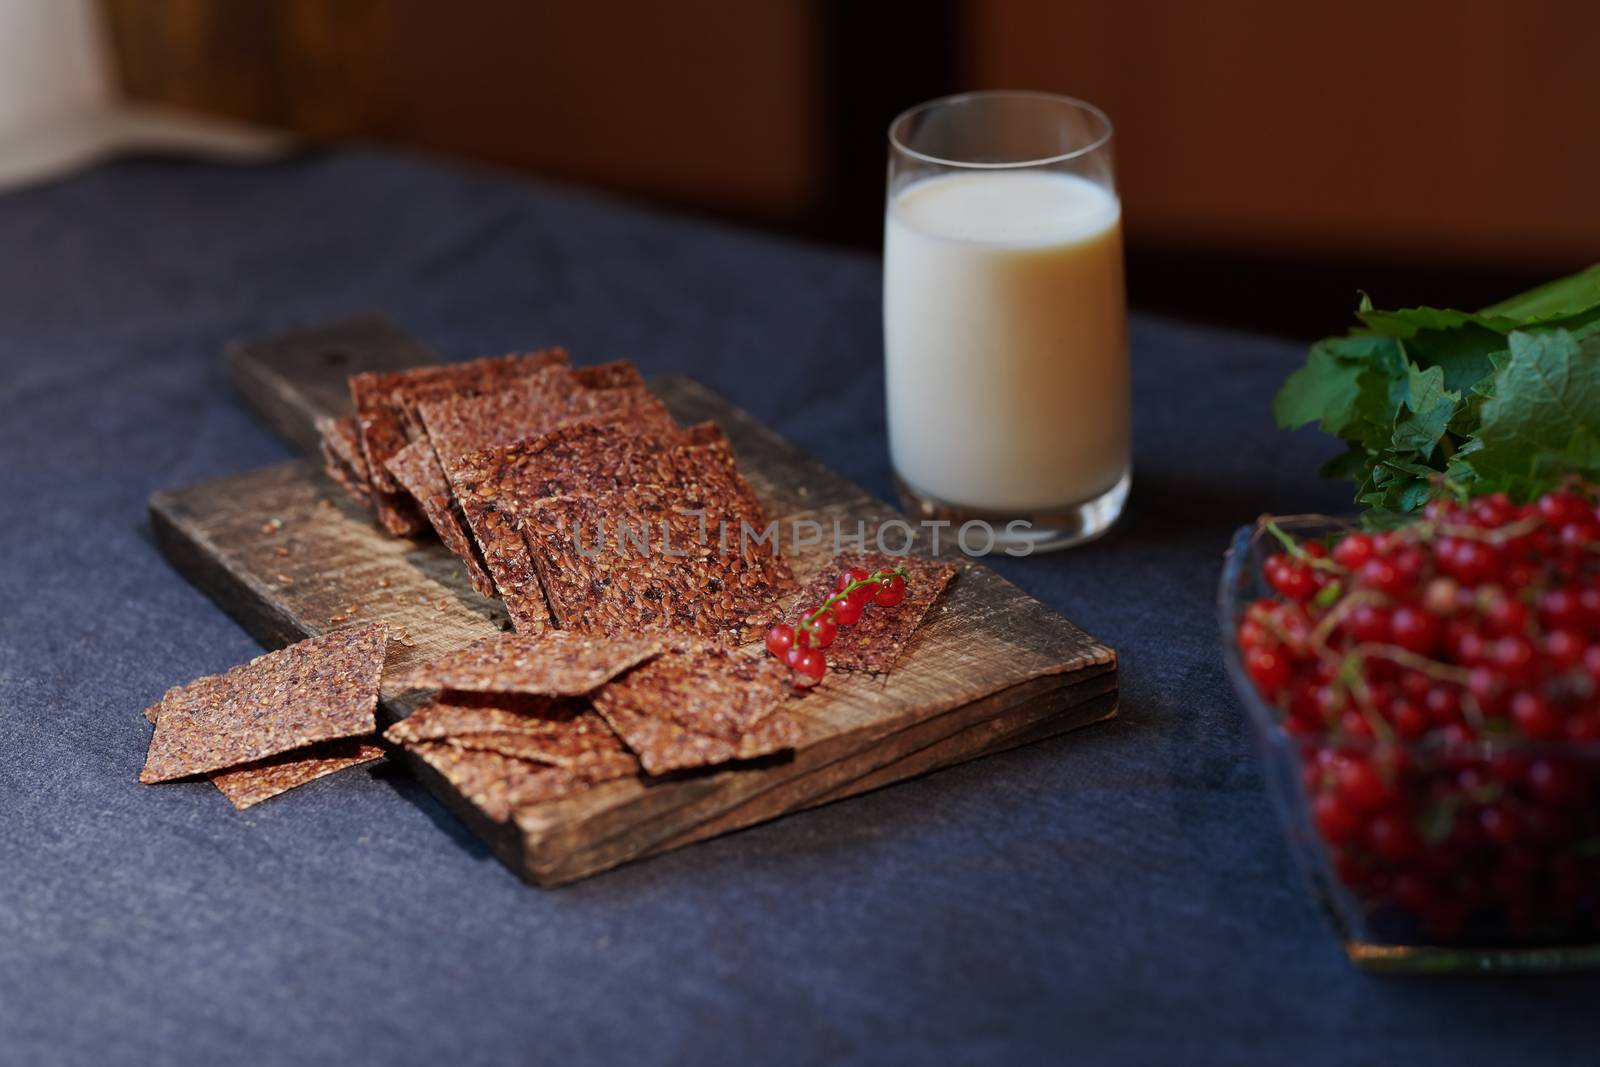 Vegan flaxseed bread with berries next to the glass with coconut by Novic